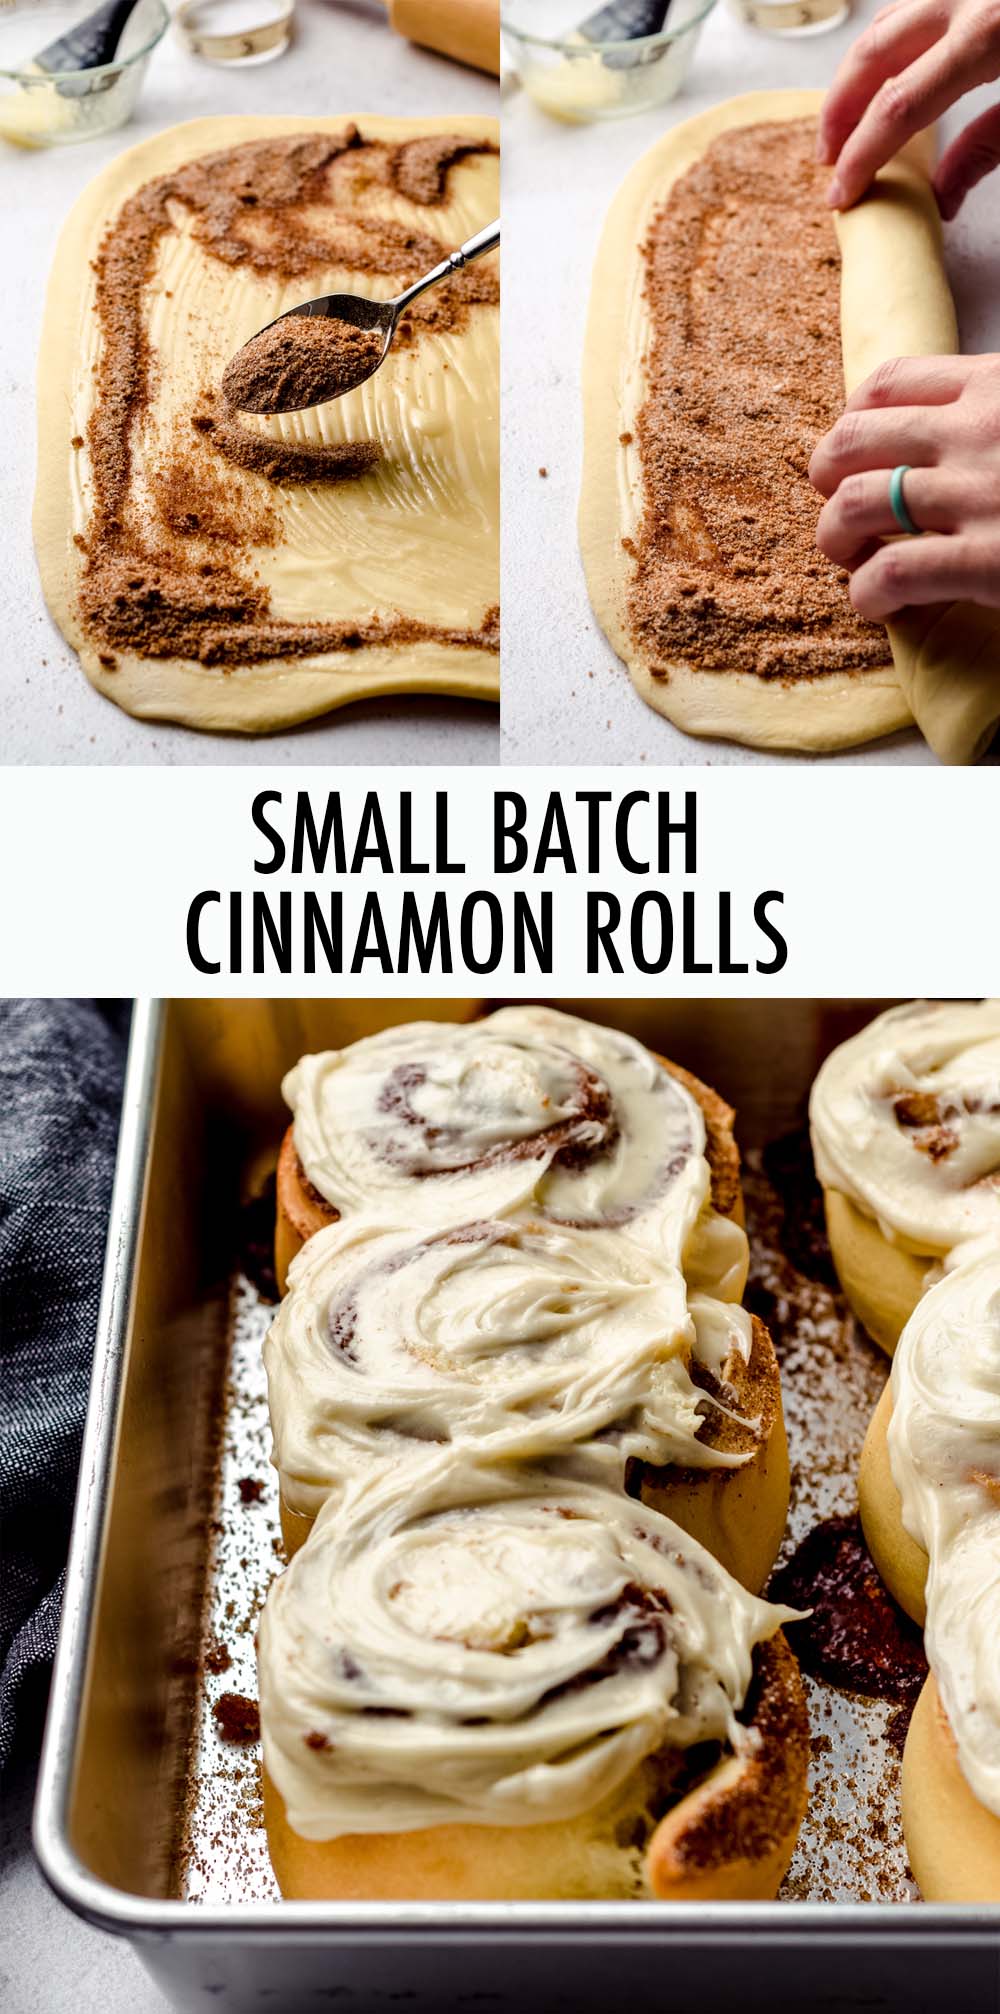 This recipe produces 6 soft and fluffy enriched cinnamon rolls that are filled with a buttery cinnamon filling and topped with a smooth cream cheese frosting. These cinnamon rolls only require one rise or can be made ahead of time to bake later or the next day. via @frshaprilflours